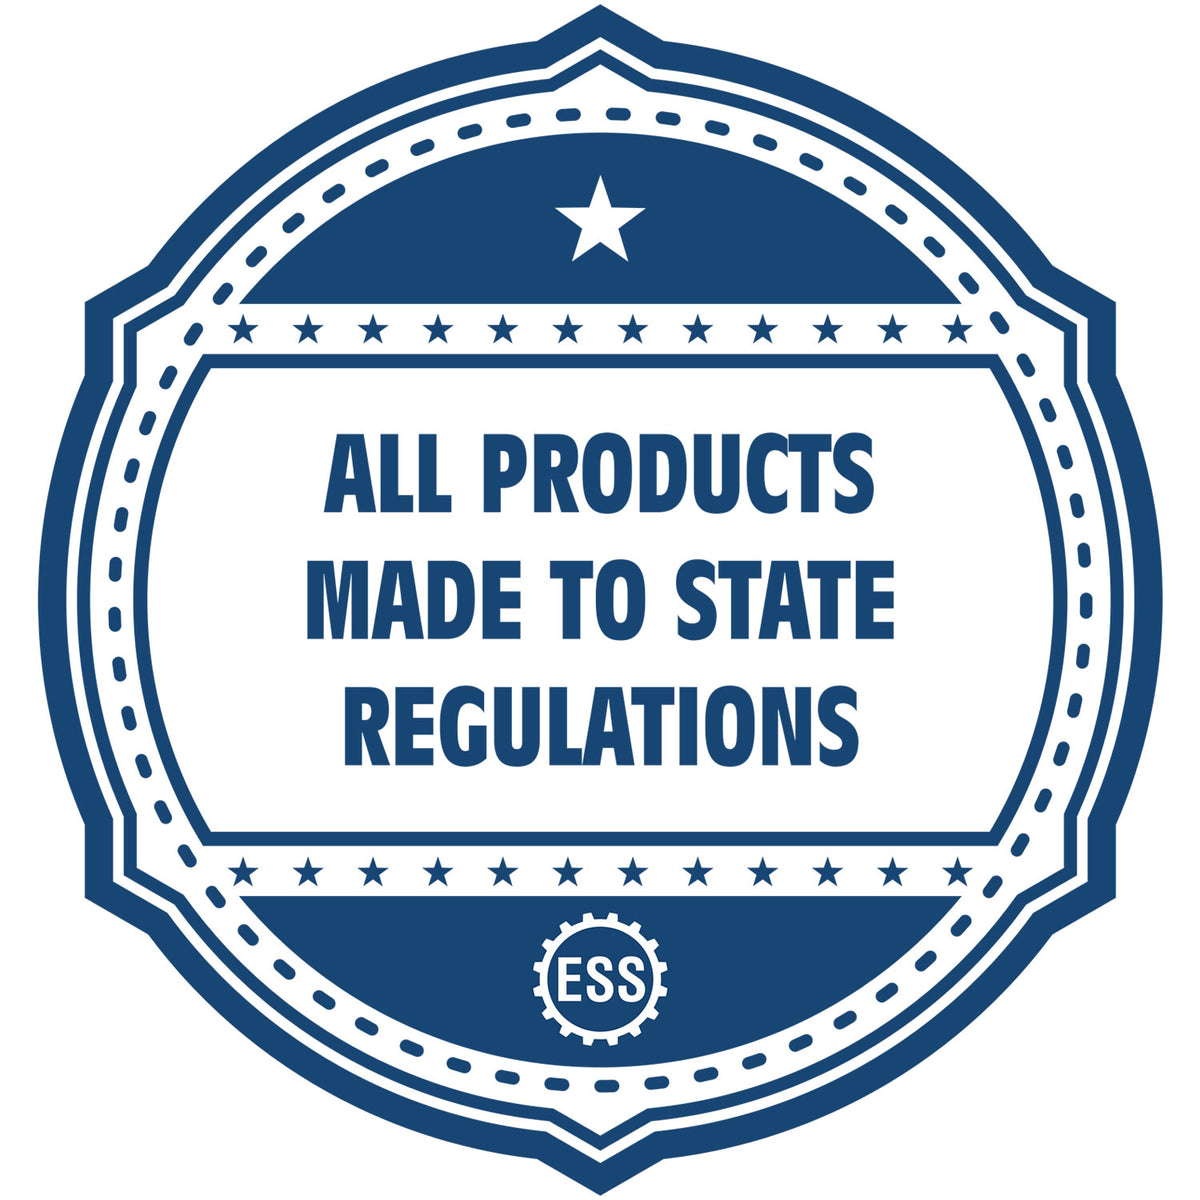 An icon or badge element for the Heavy Duty Cast Iron Tennessee Engineer Seal Embosser showing that this product is made in compliance with state regulations.